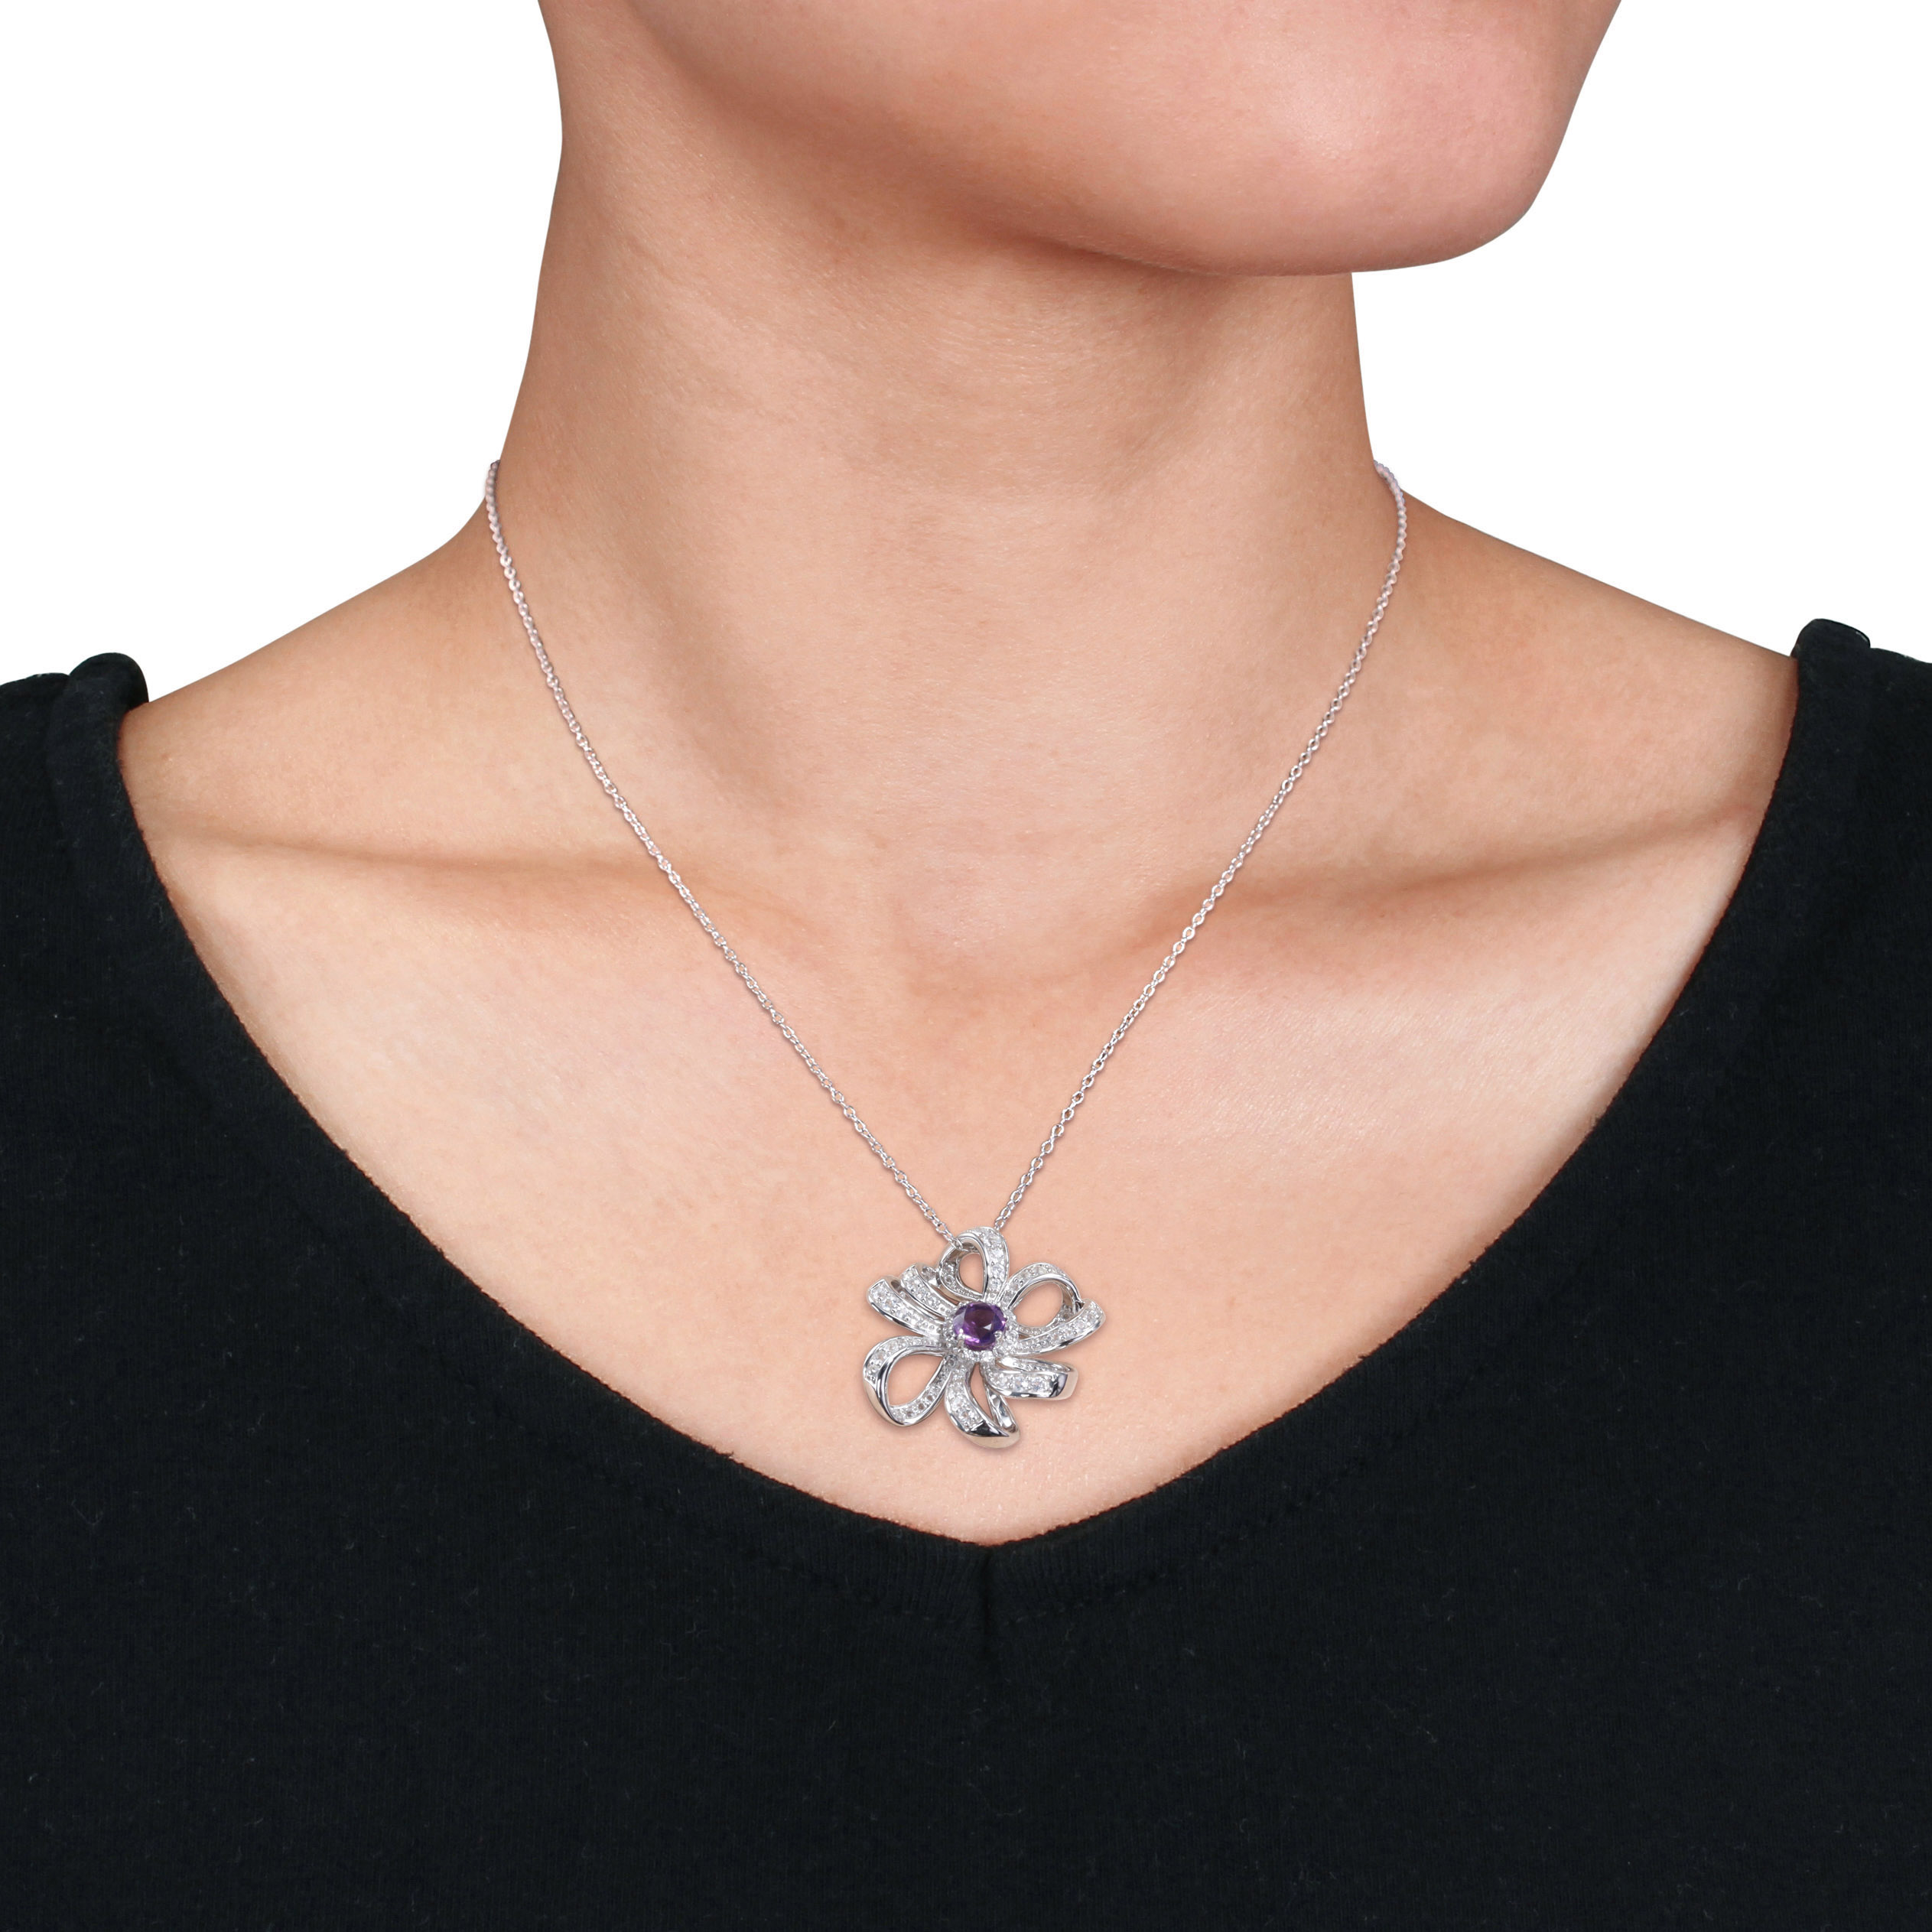 2 CT TGW African Amethyst and White Topaz Flower Pendant with Chain in Sterling Silver